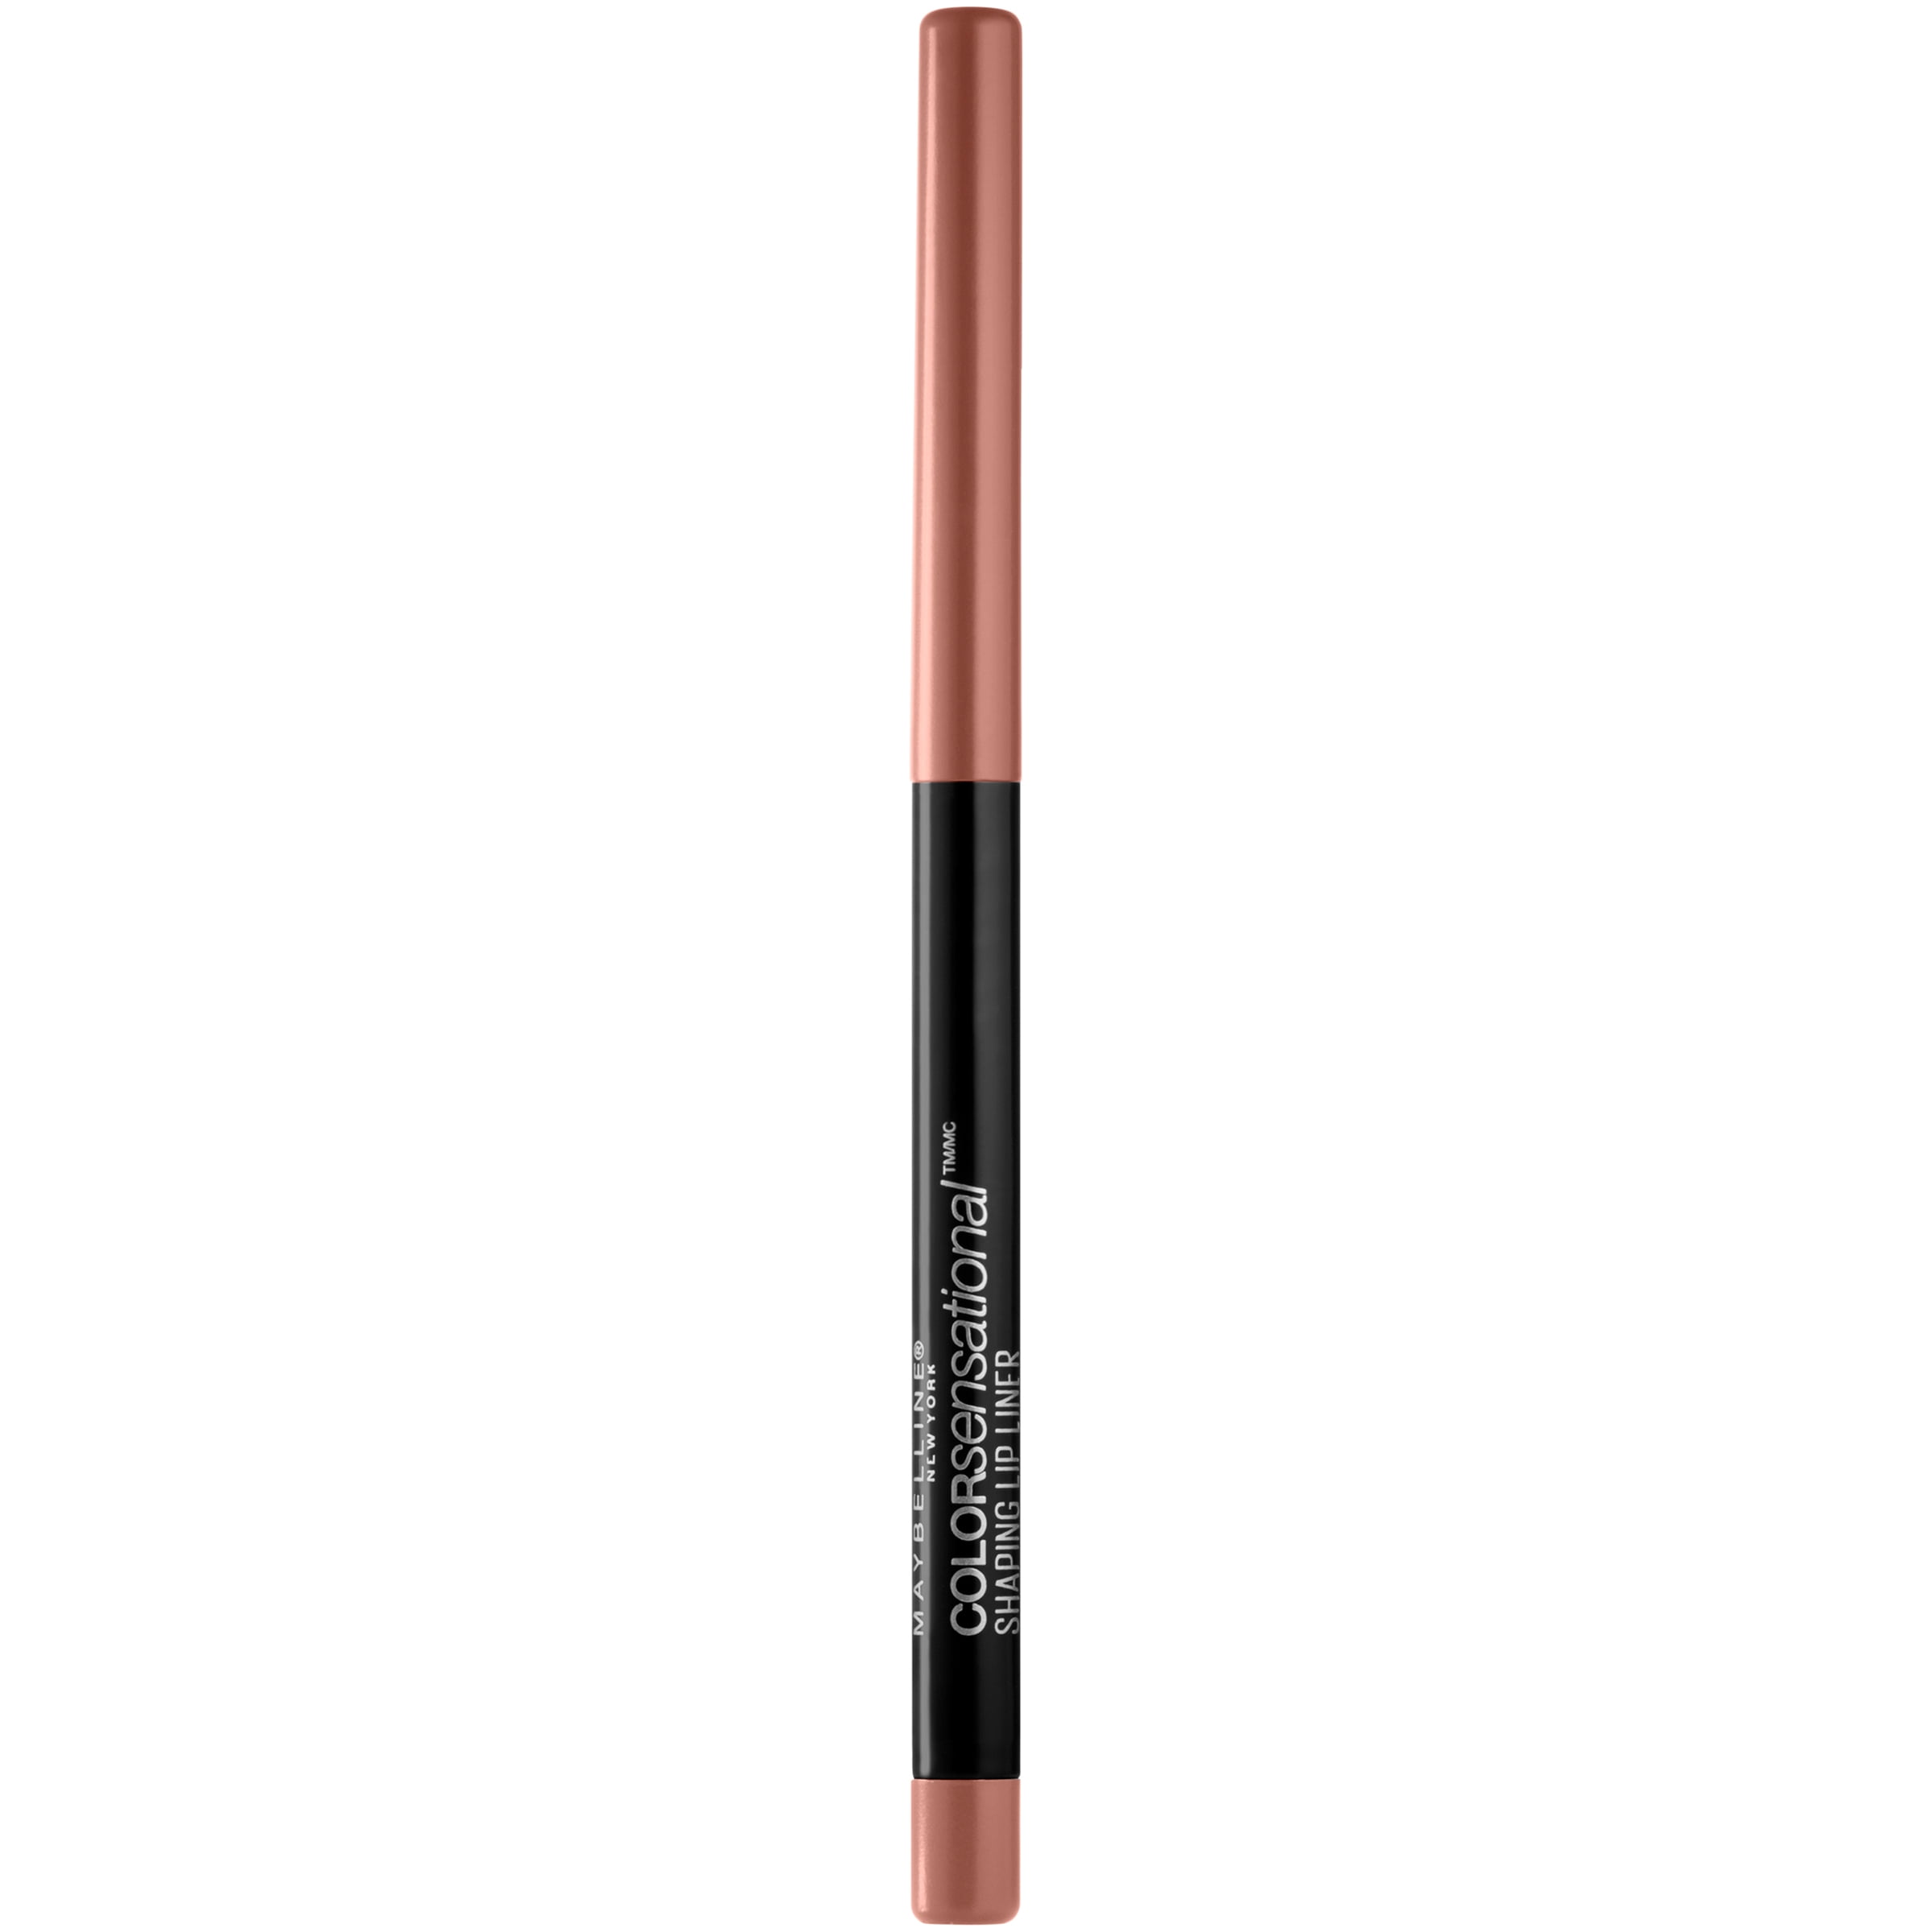 Chocolate, Lip Shaping 0.01 Color oz. Maybelline Raw Sensational Makeup, Liner